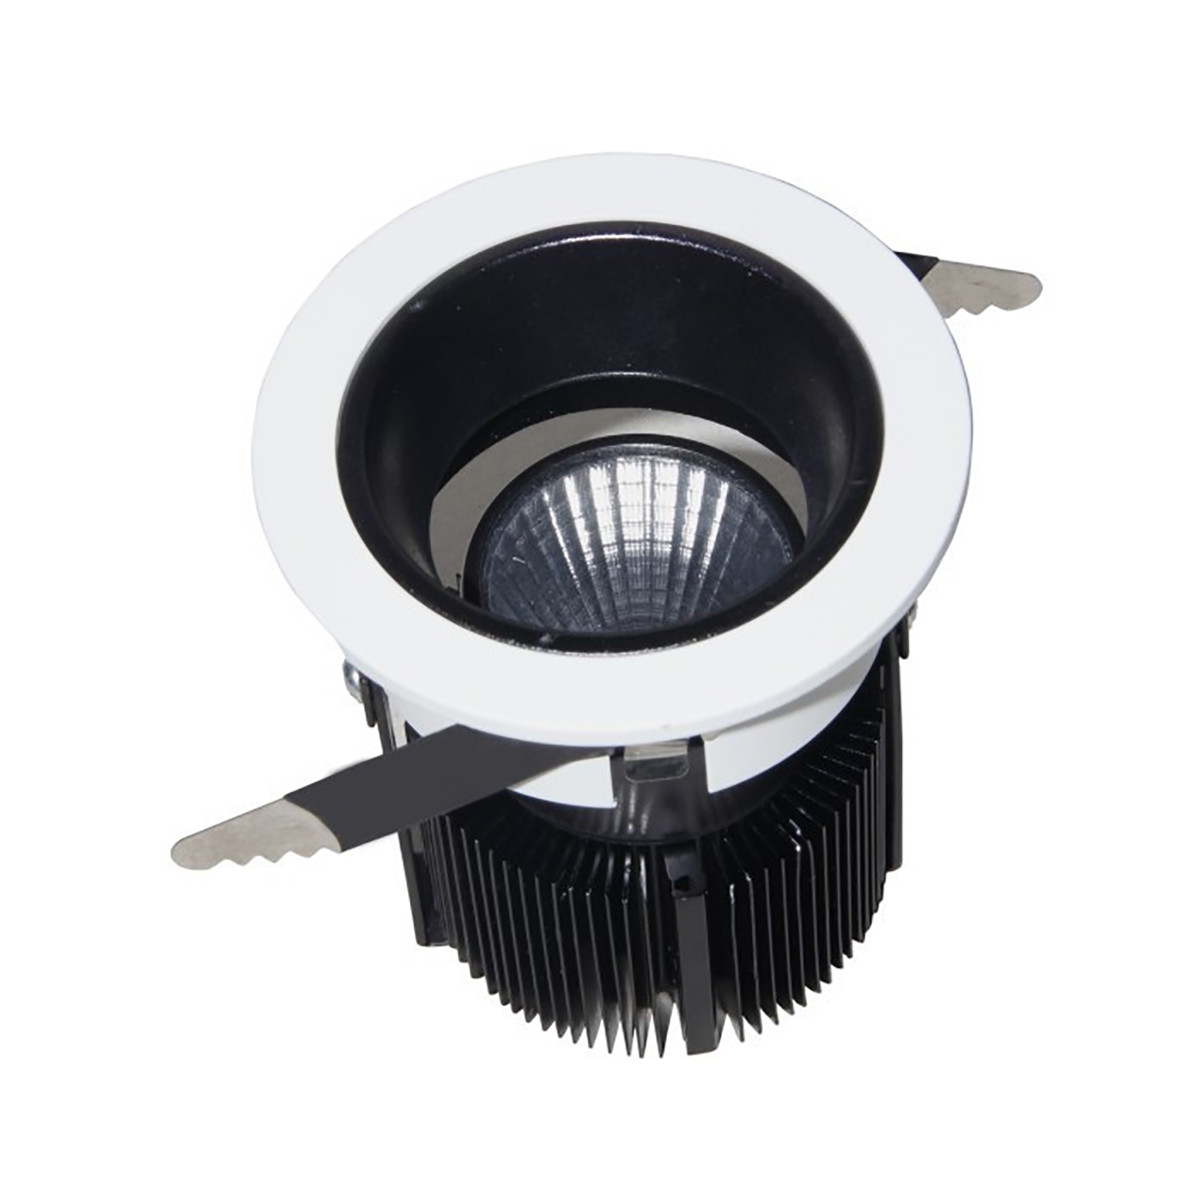 2.95Inch Cutout Ф75mm Adjustable Recessed Roof Mounting LED Downlights with Black Inner reflector